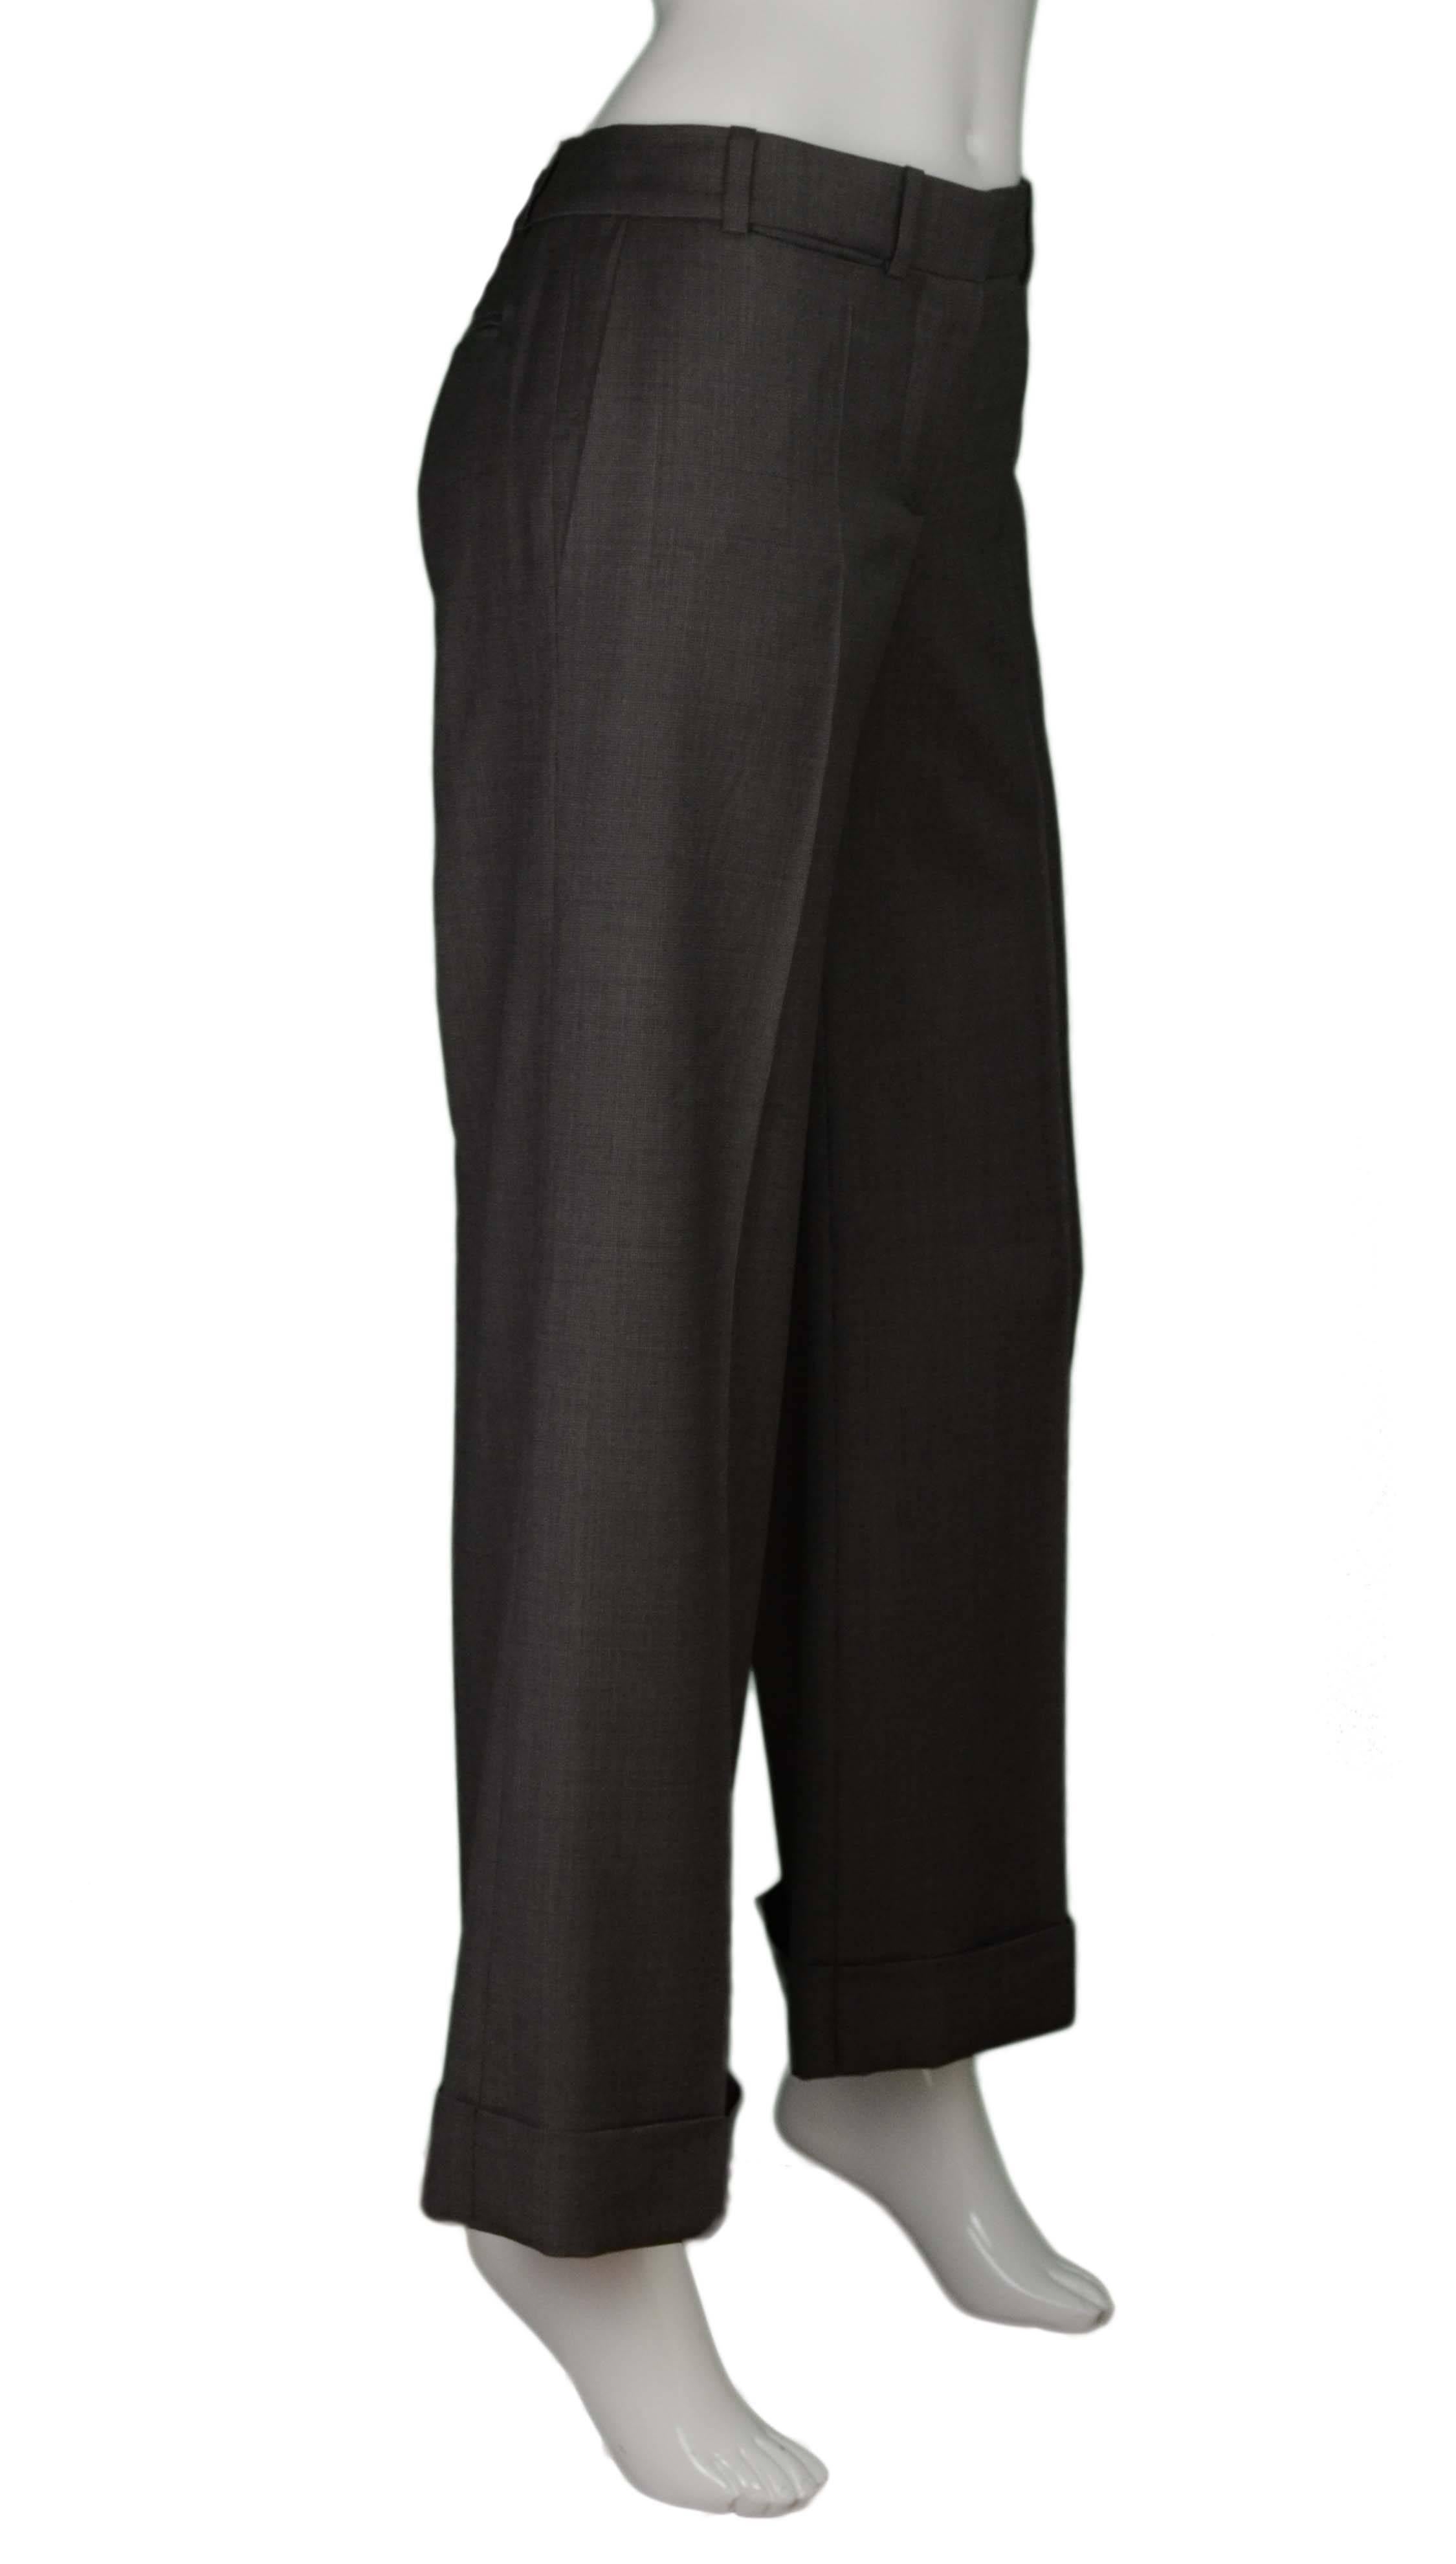 Chloe Grey Wool Wide Leg Pants 
Features wide cuffs at hemlines
Made In: France
Color: Grey
Composition: 100% wool
Lining: 100% cotton
Closure/Opening: Front zipper and hook and eye closure
Pockets: Two hip pockets, two small slit pockets,